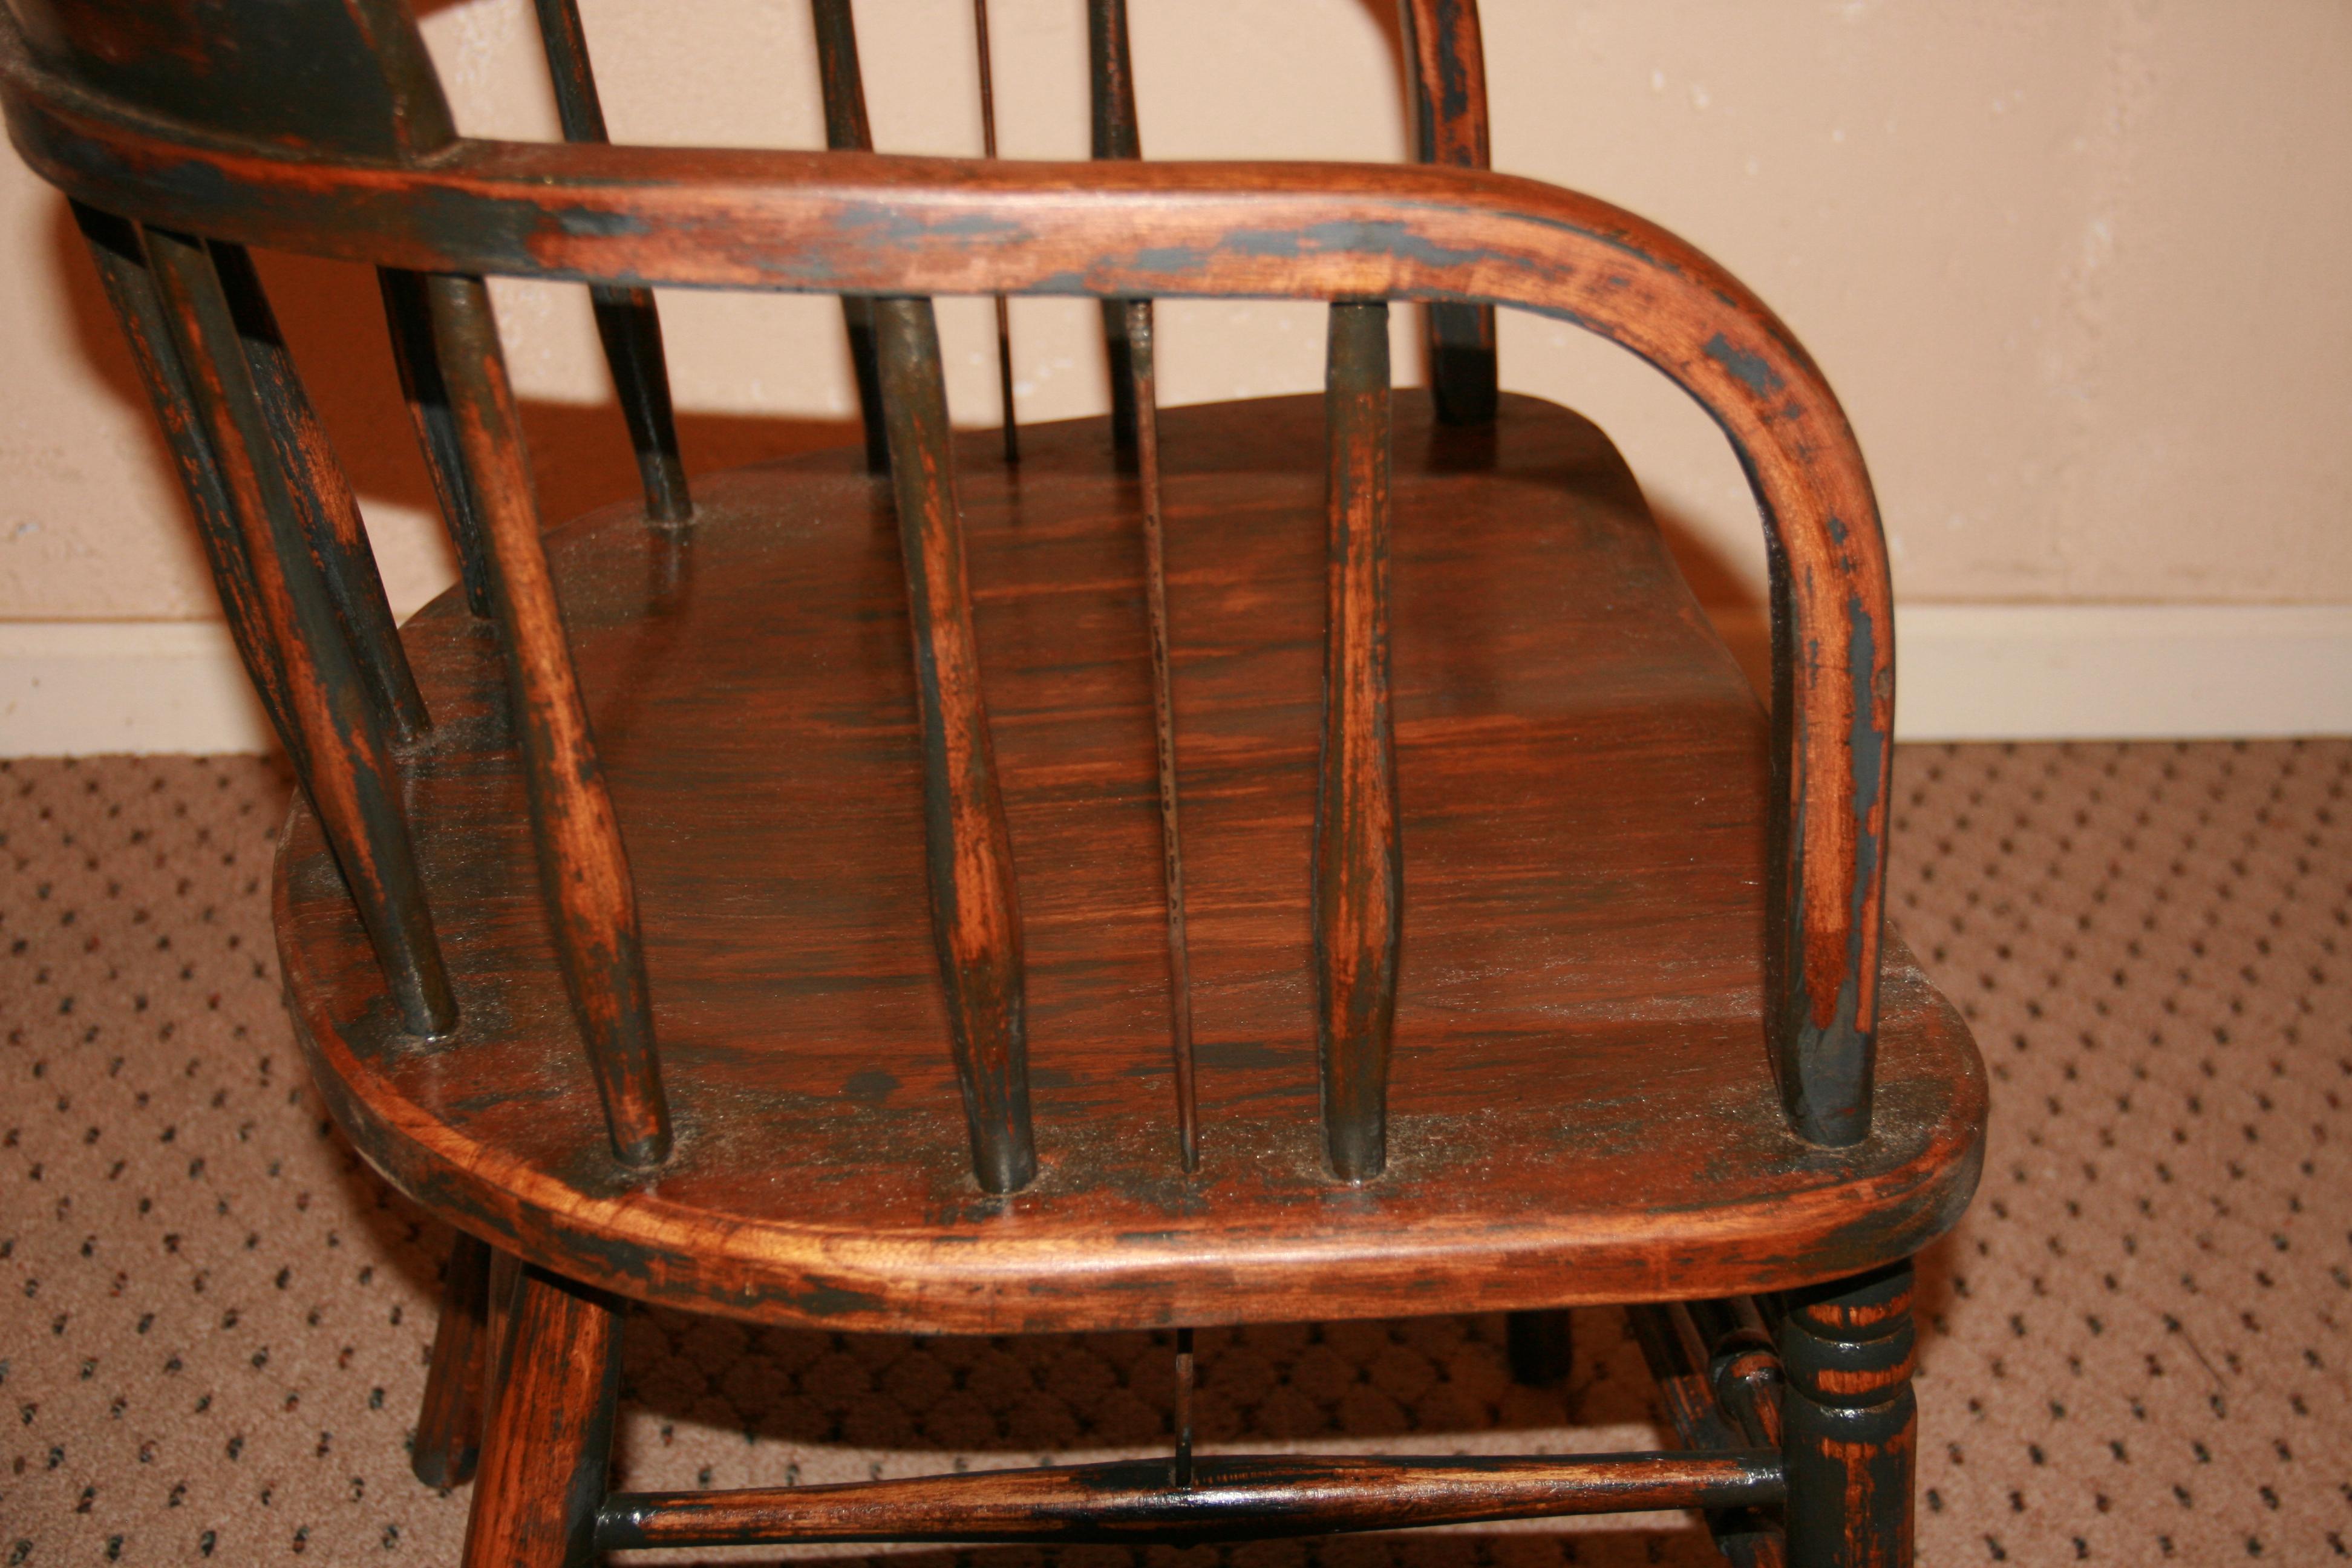 Early 20th Century English Barrel Back Wood Chair 1920's For Sale